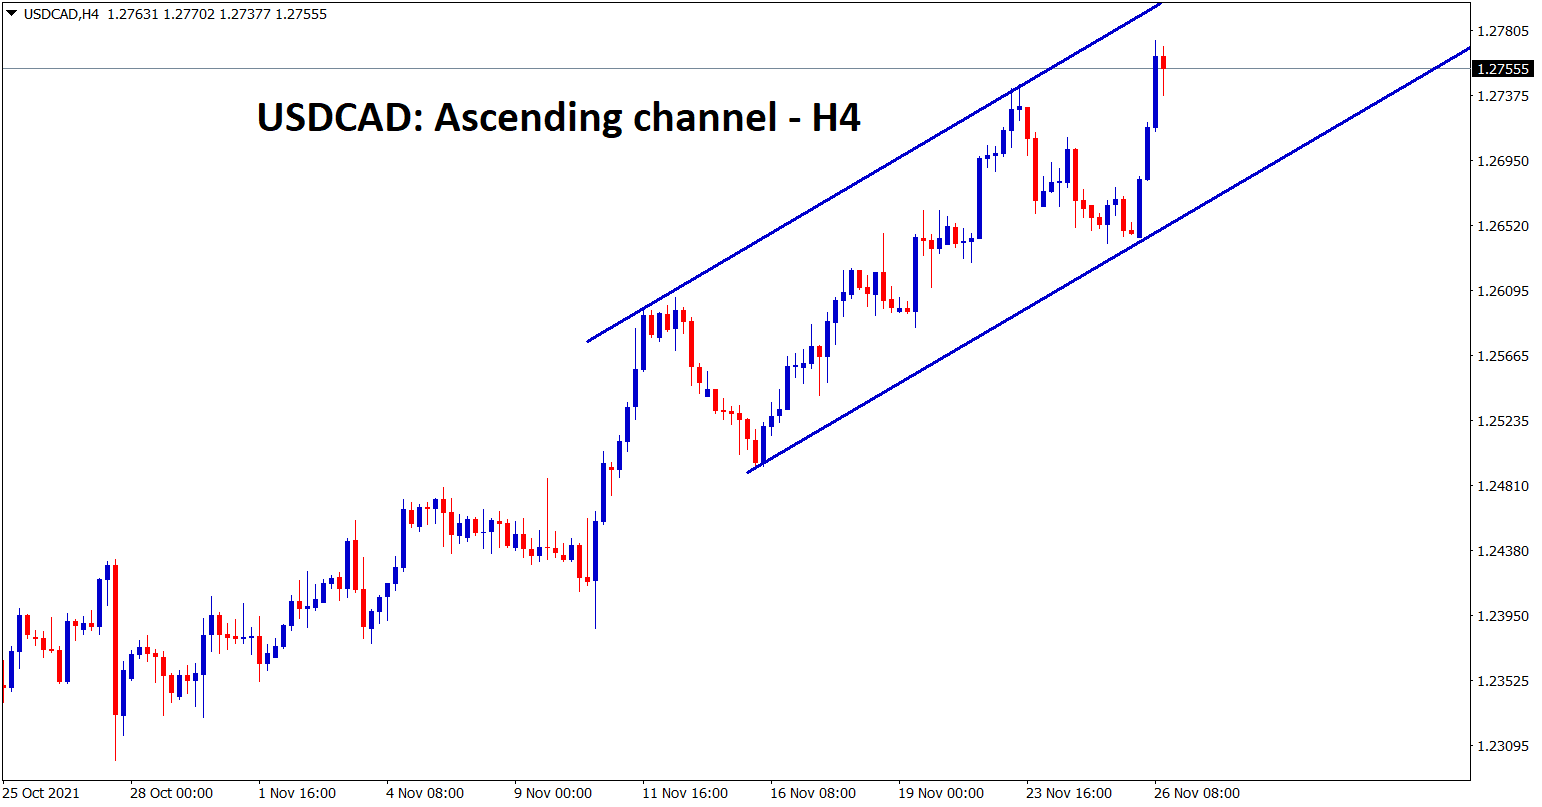 USDCAD is moving in a strong uptrend crude oil price leads to CAD weakness